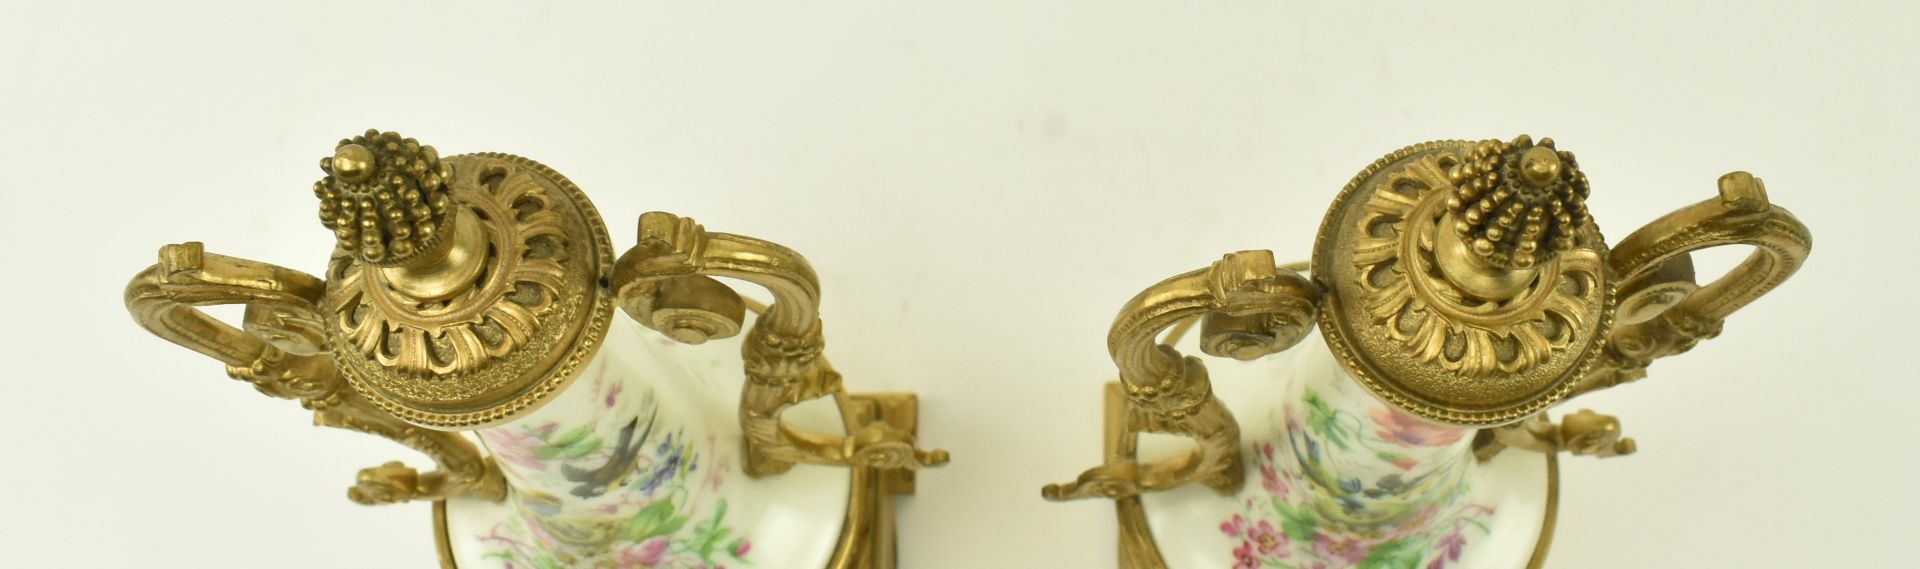 FRENCH 19TH CENTURY PORCELAIN & GILT BRONZE MANTLE URNS - Image 3 of 7